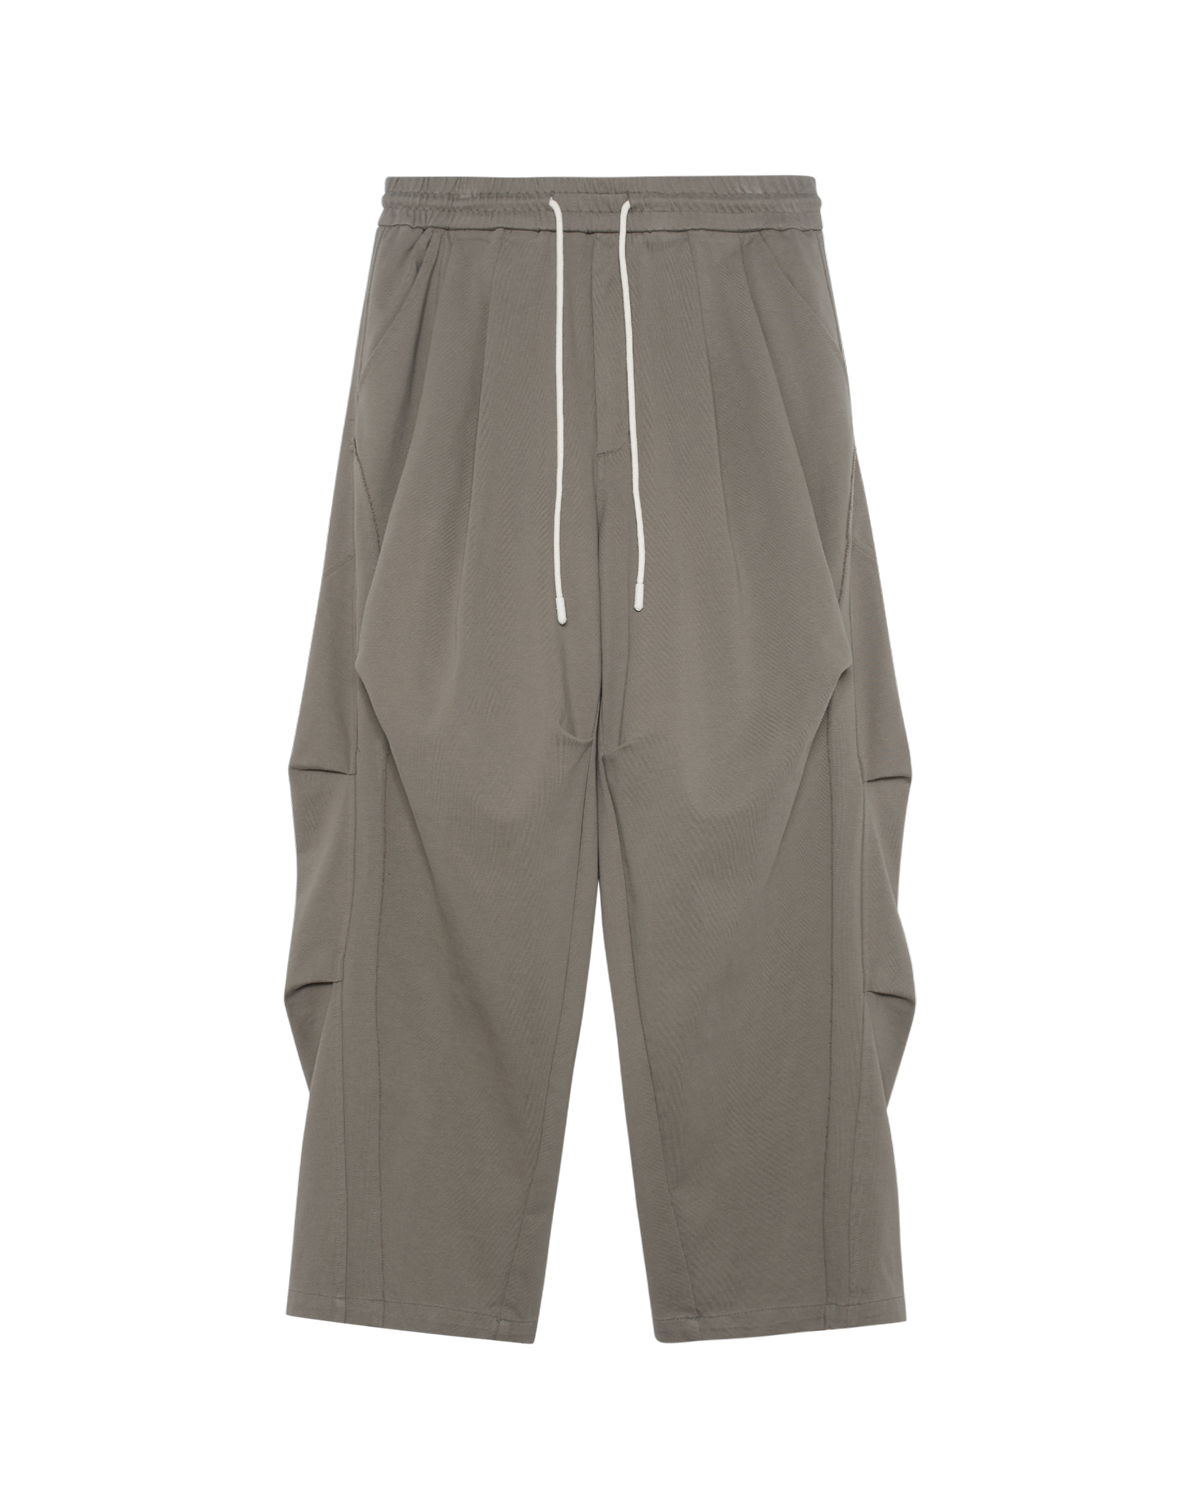 Off the label drawstring cargo pants brown